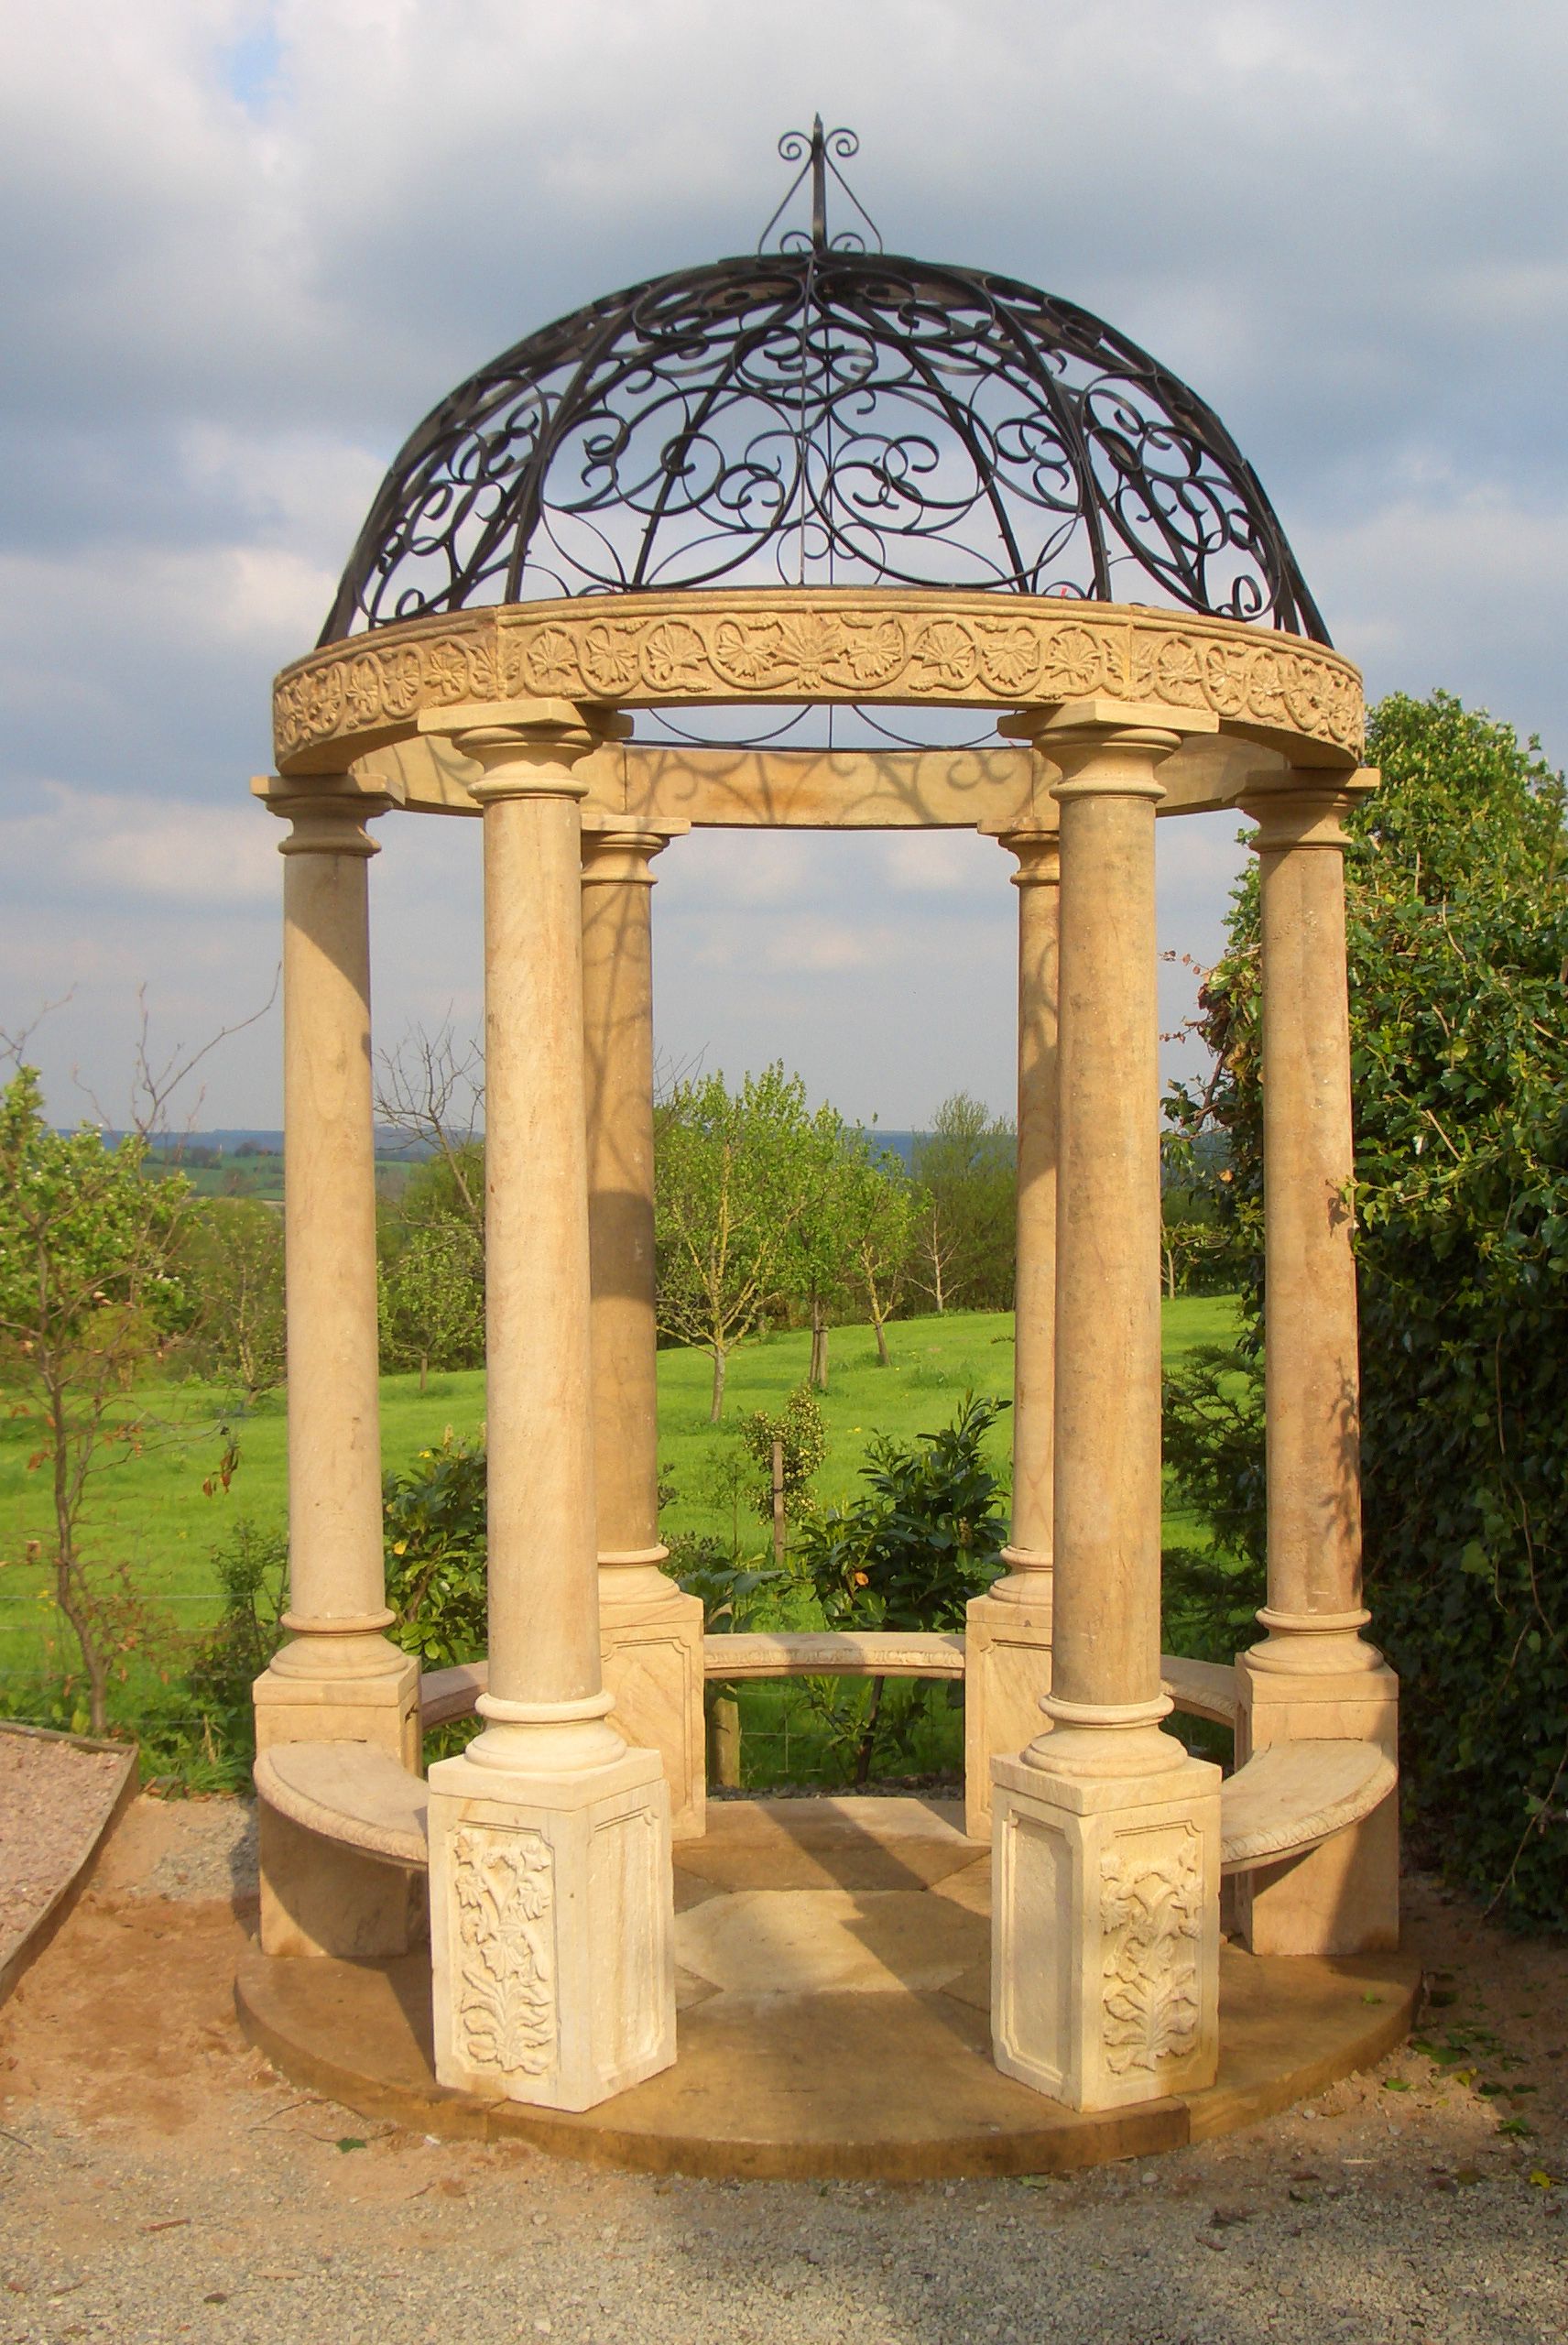 † A hand carved sandstone Rotunda with domed wrought iron roof